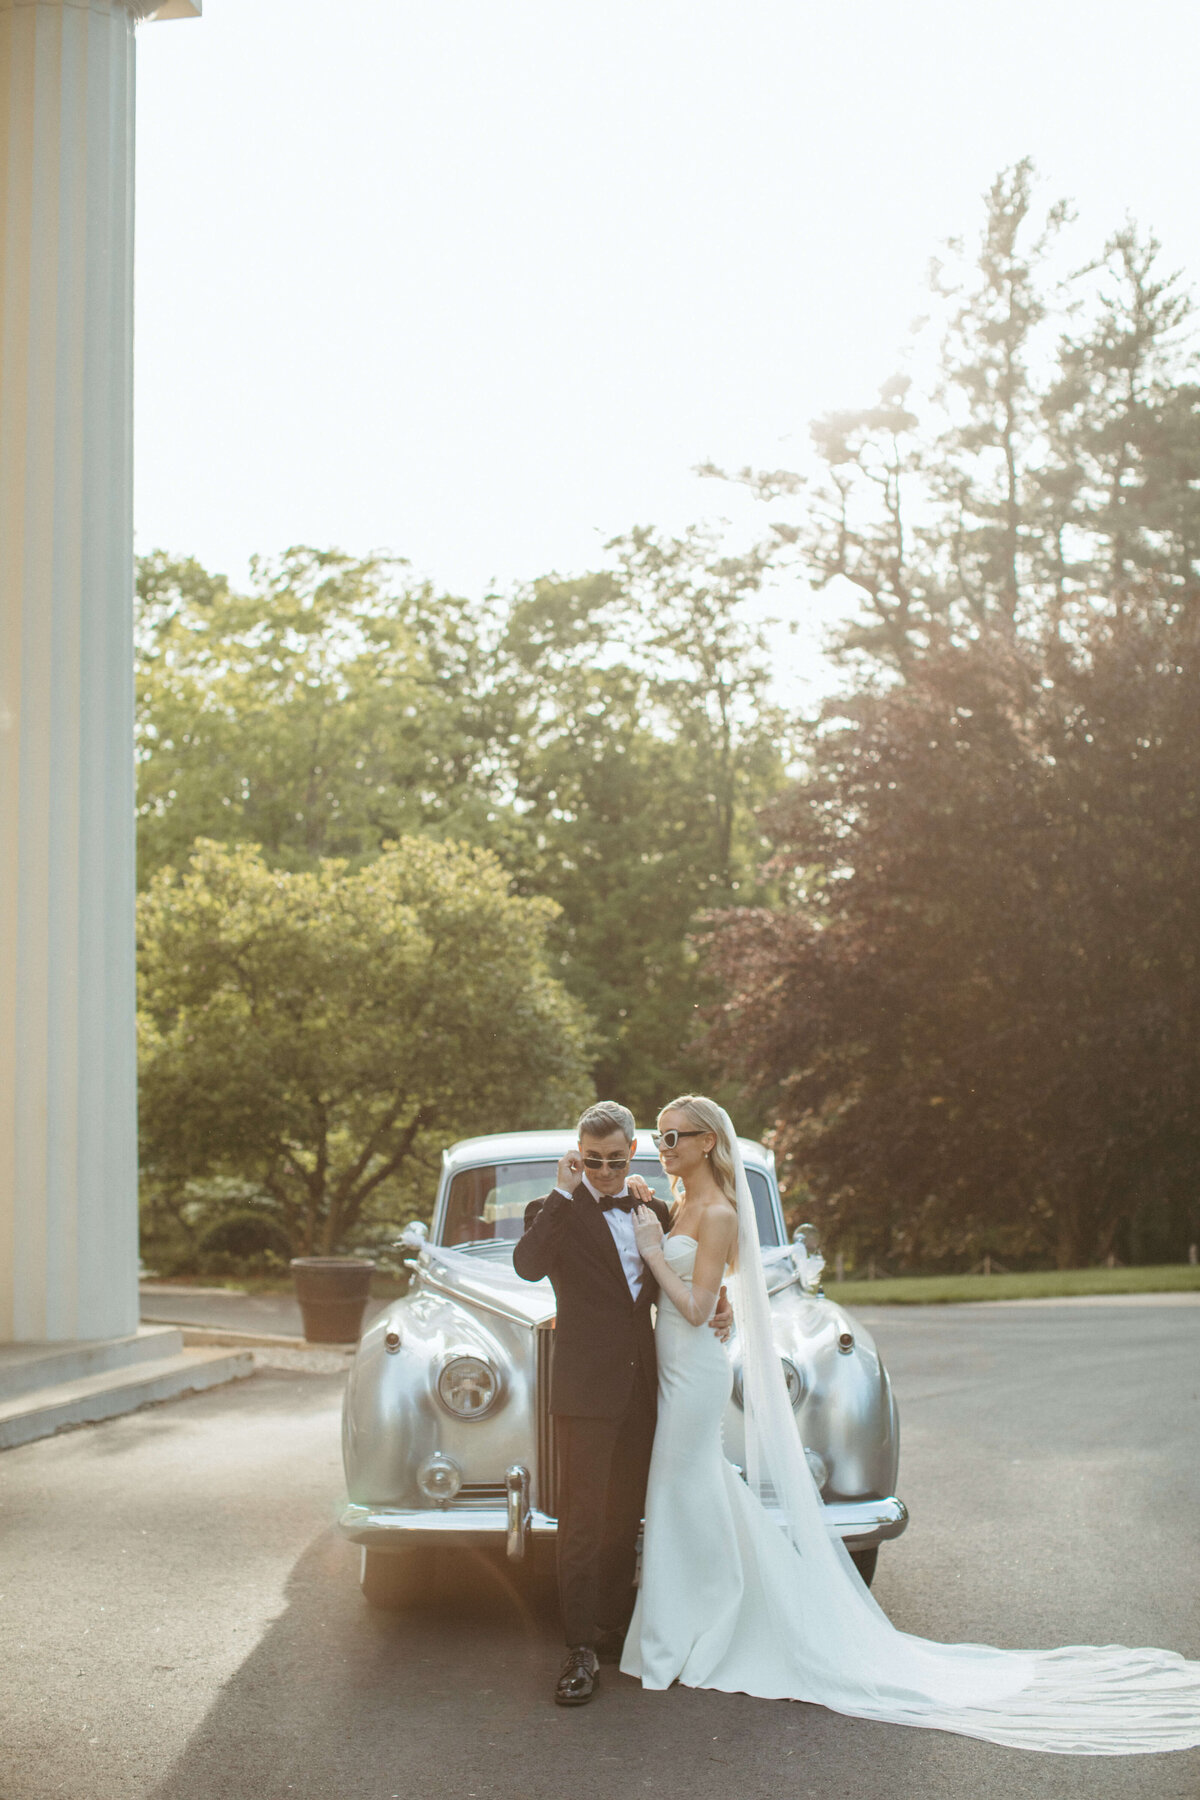 Bride and groom wearing sunglasses in front of vintage car